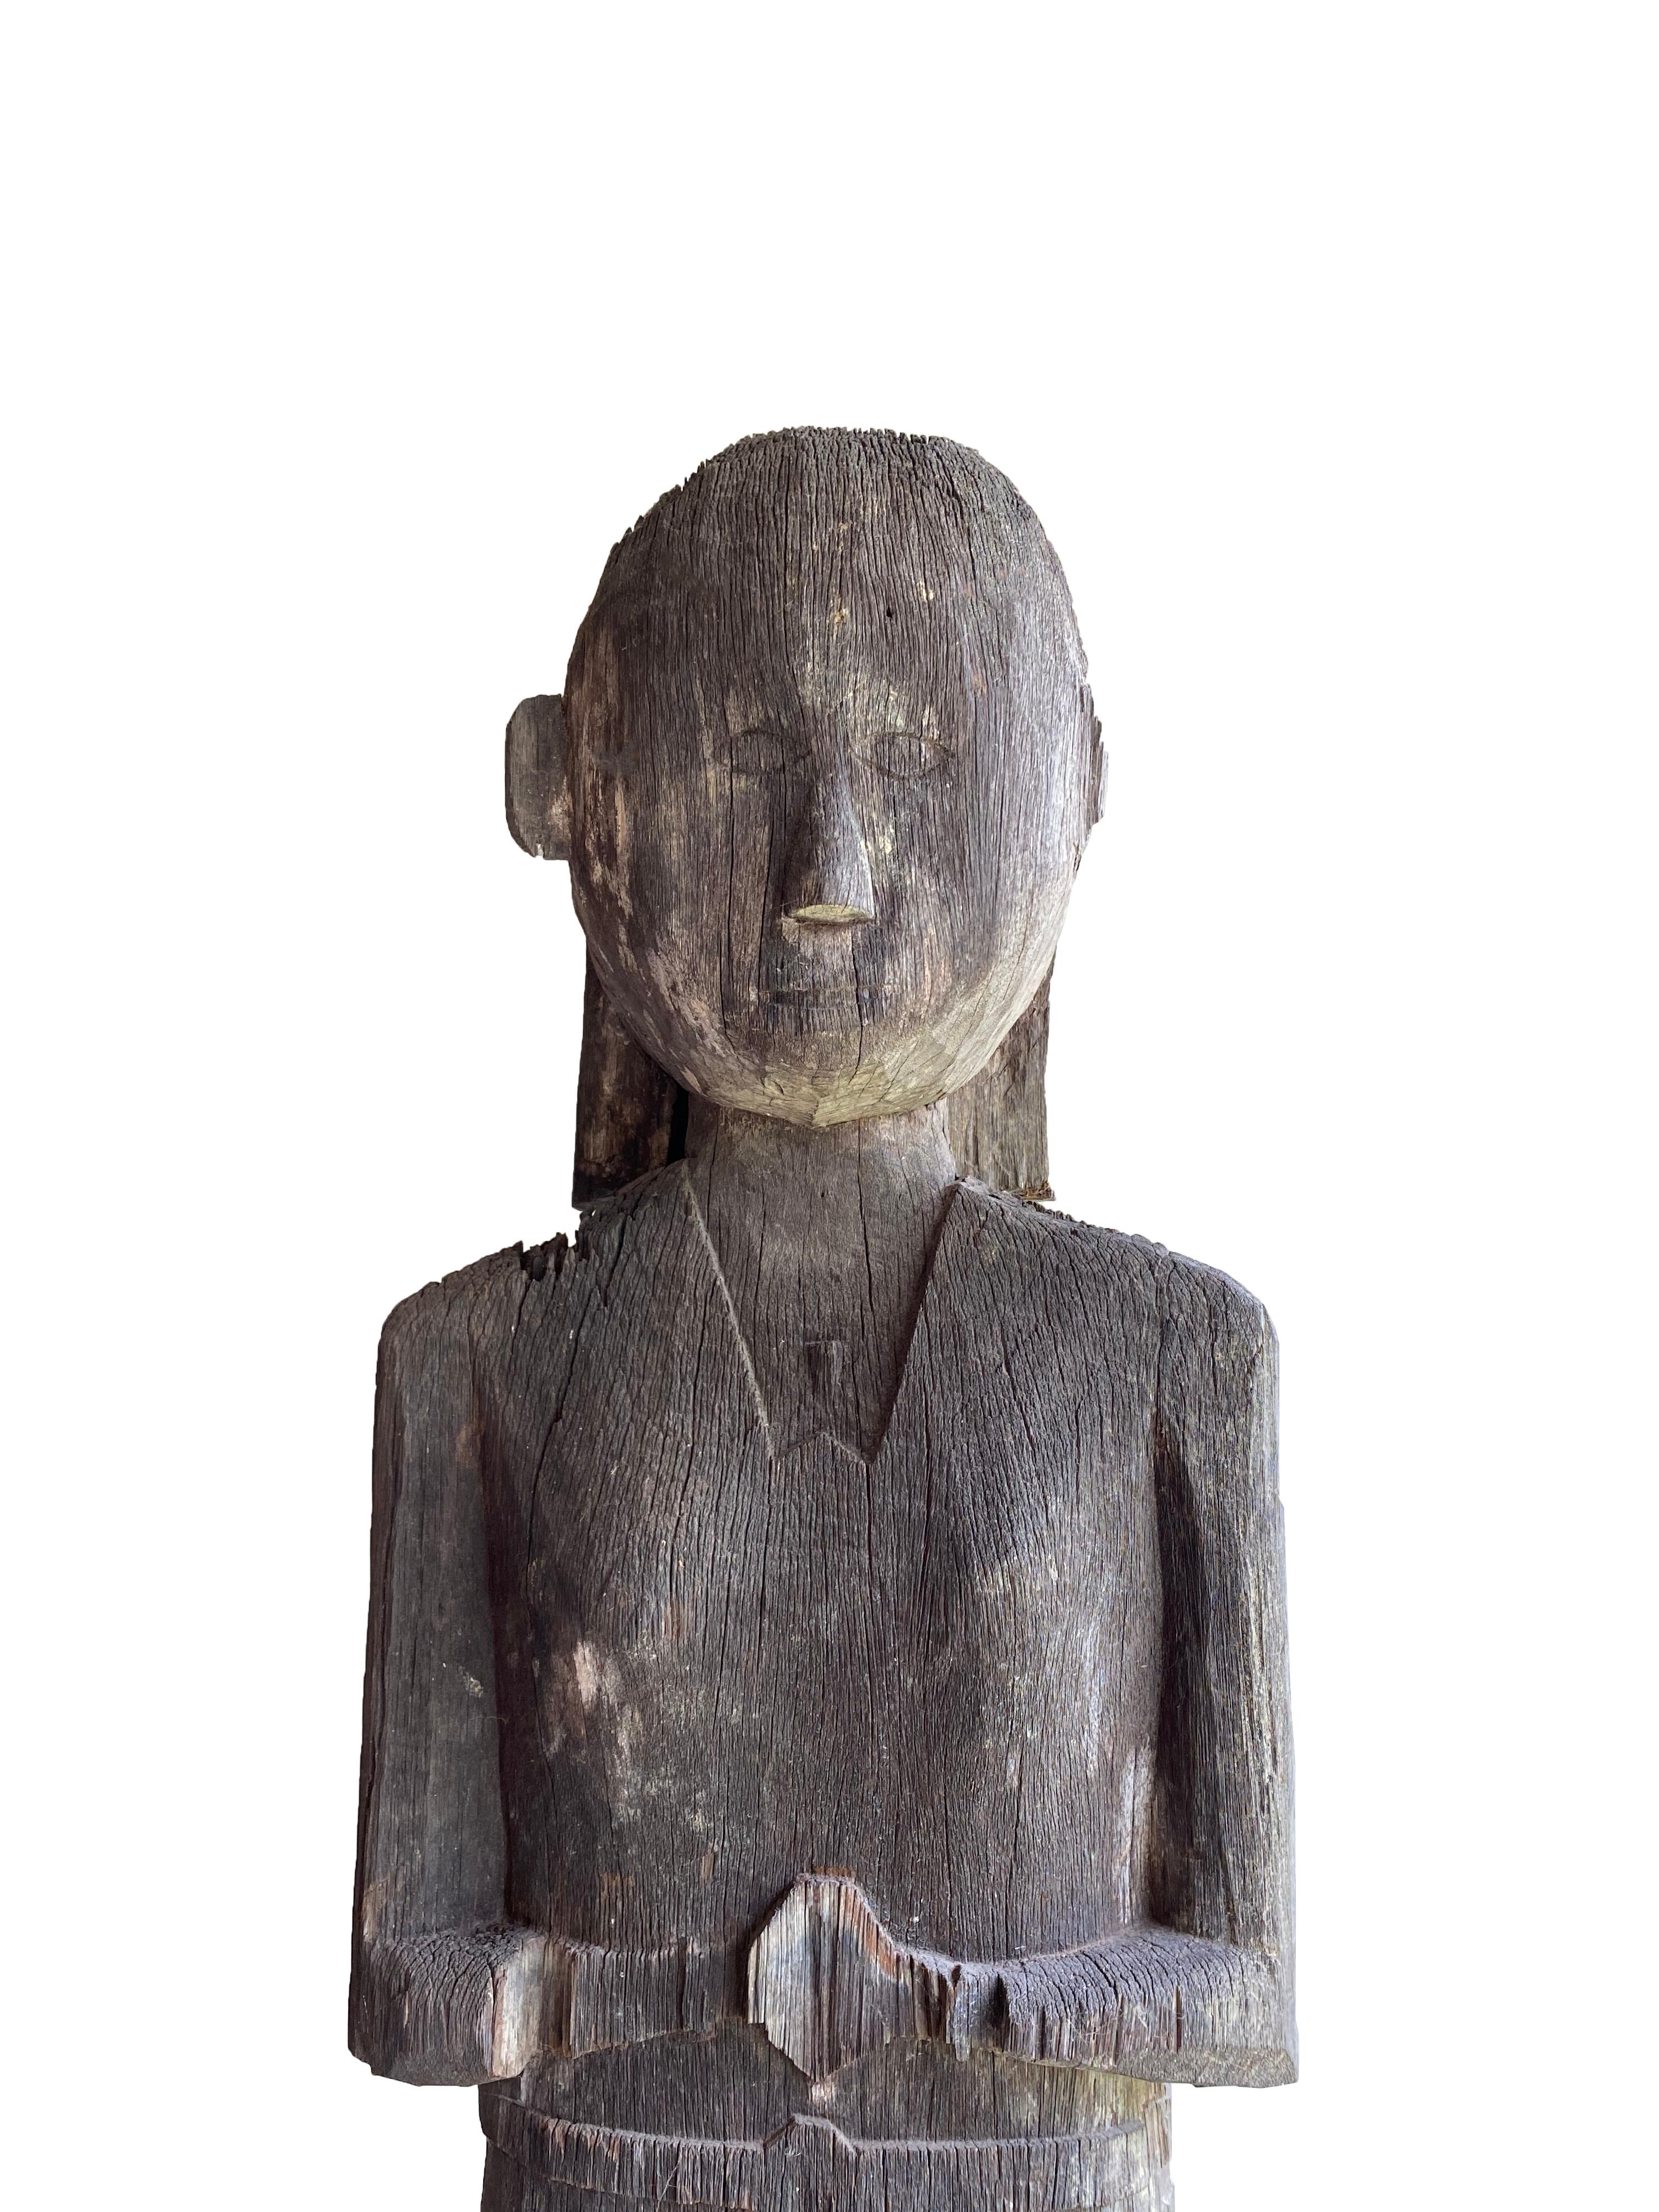 ‘Hampatong’ is the term used for ancestors and protective figures made of hard ‘iron wood’, which the Dayak of Borneo would position infront of their houses as guardians. This early 20th century sculpture features light grey age-related patina and